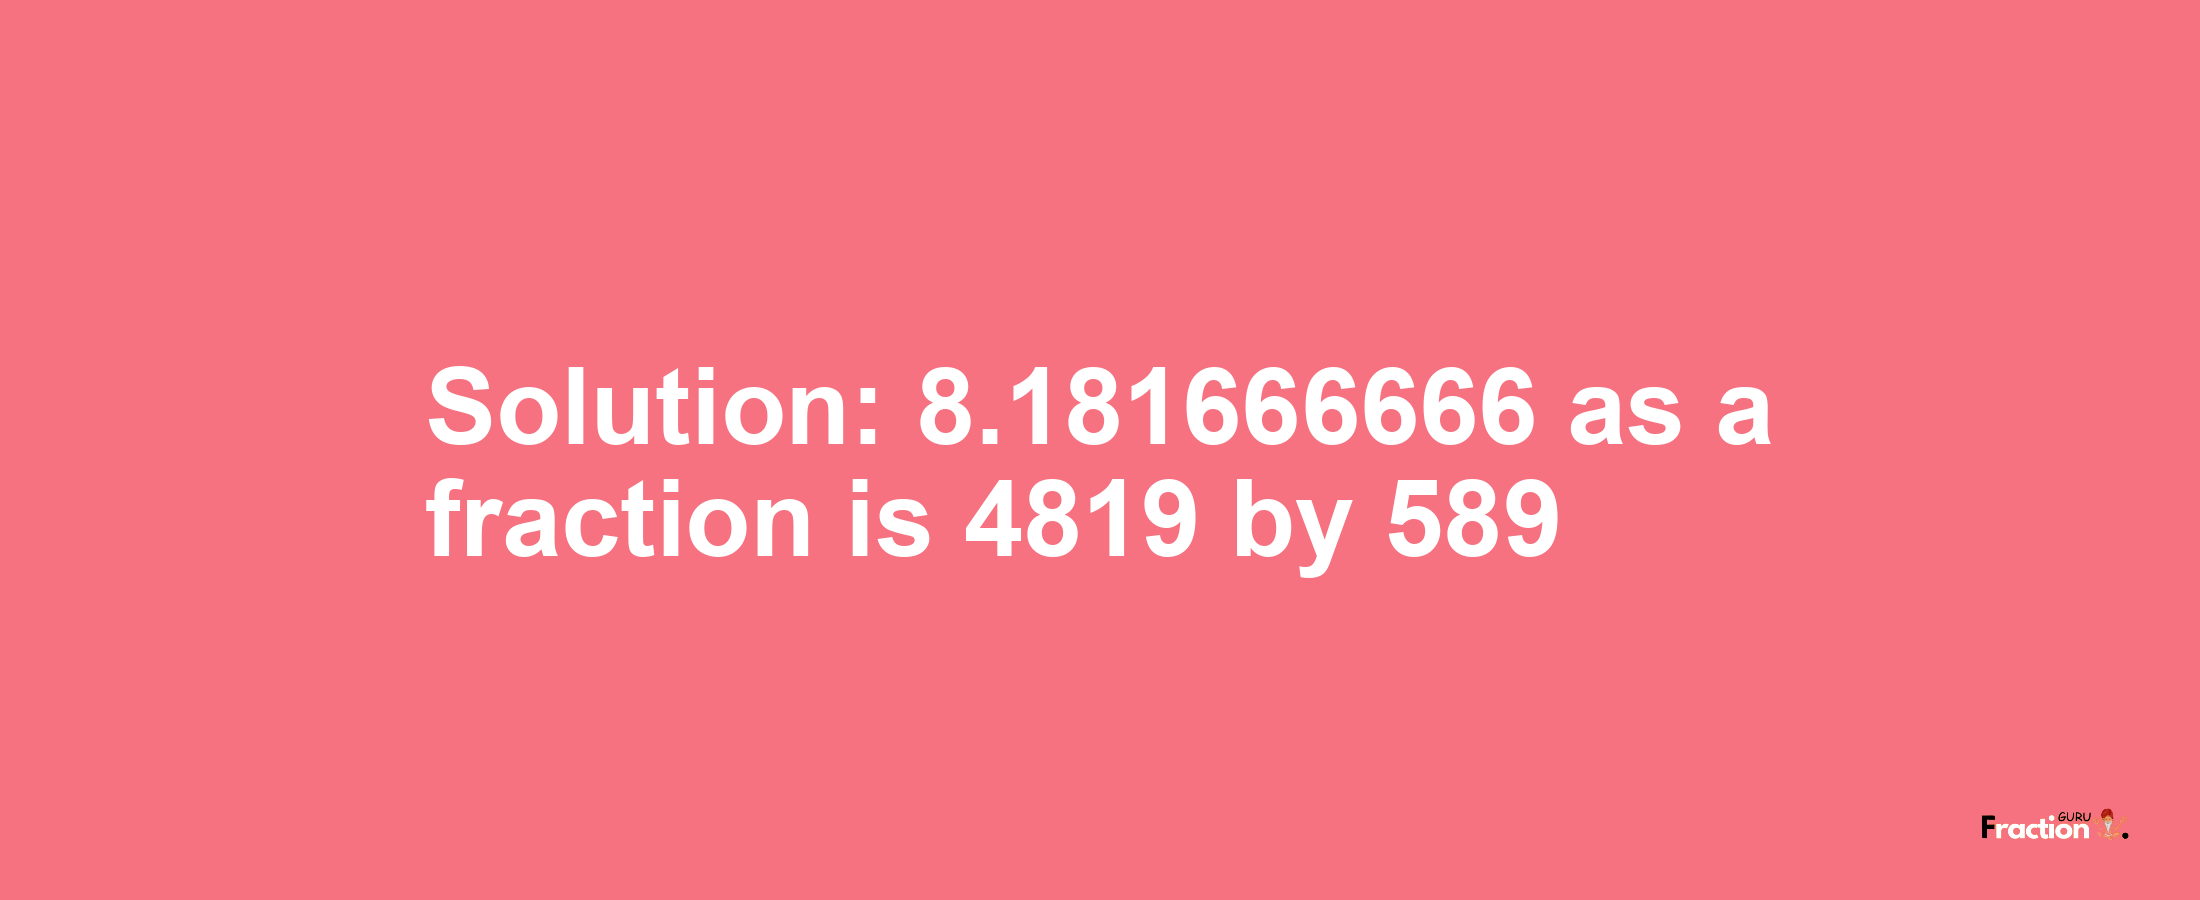 Solution:8.181666666 as a fraction is 4819/589